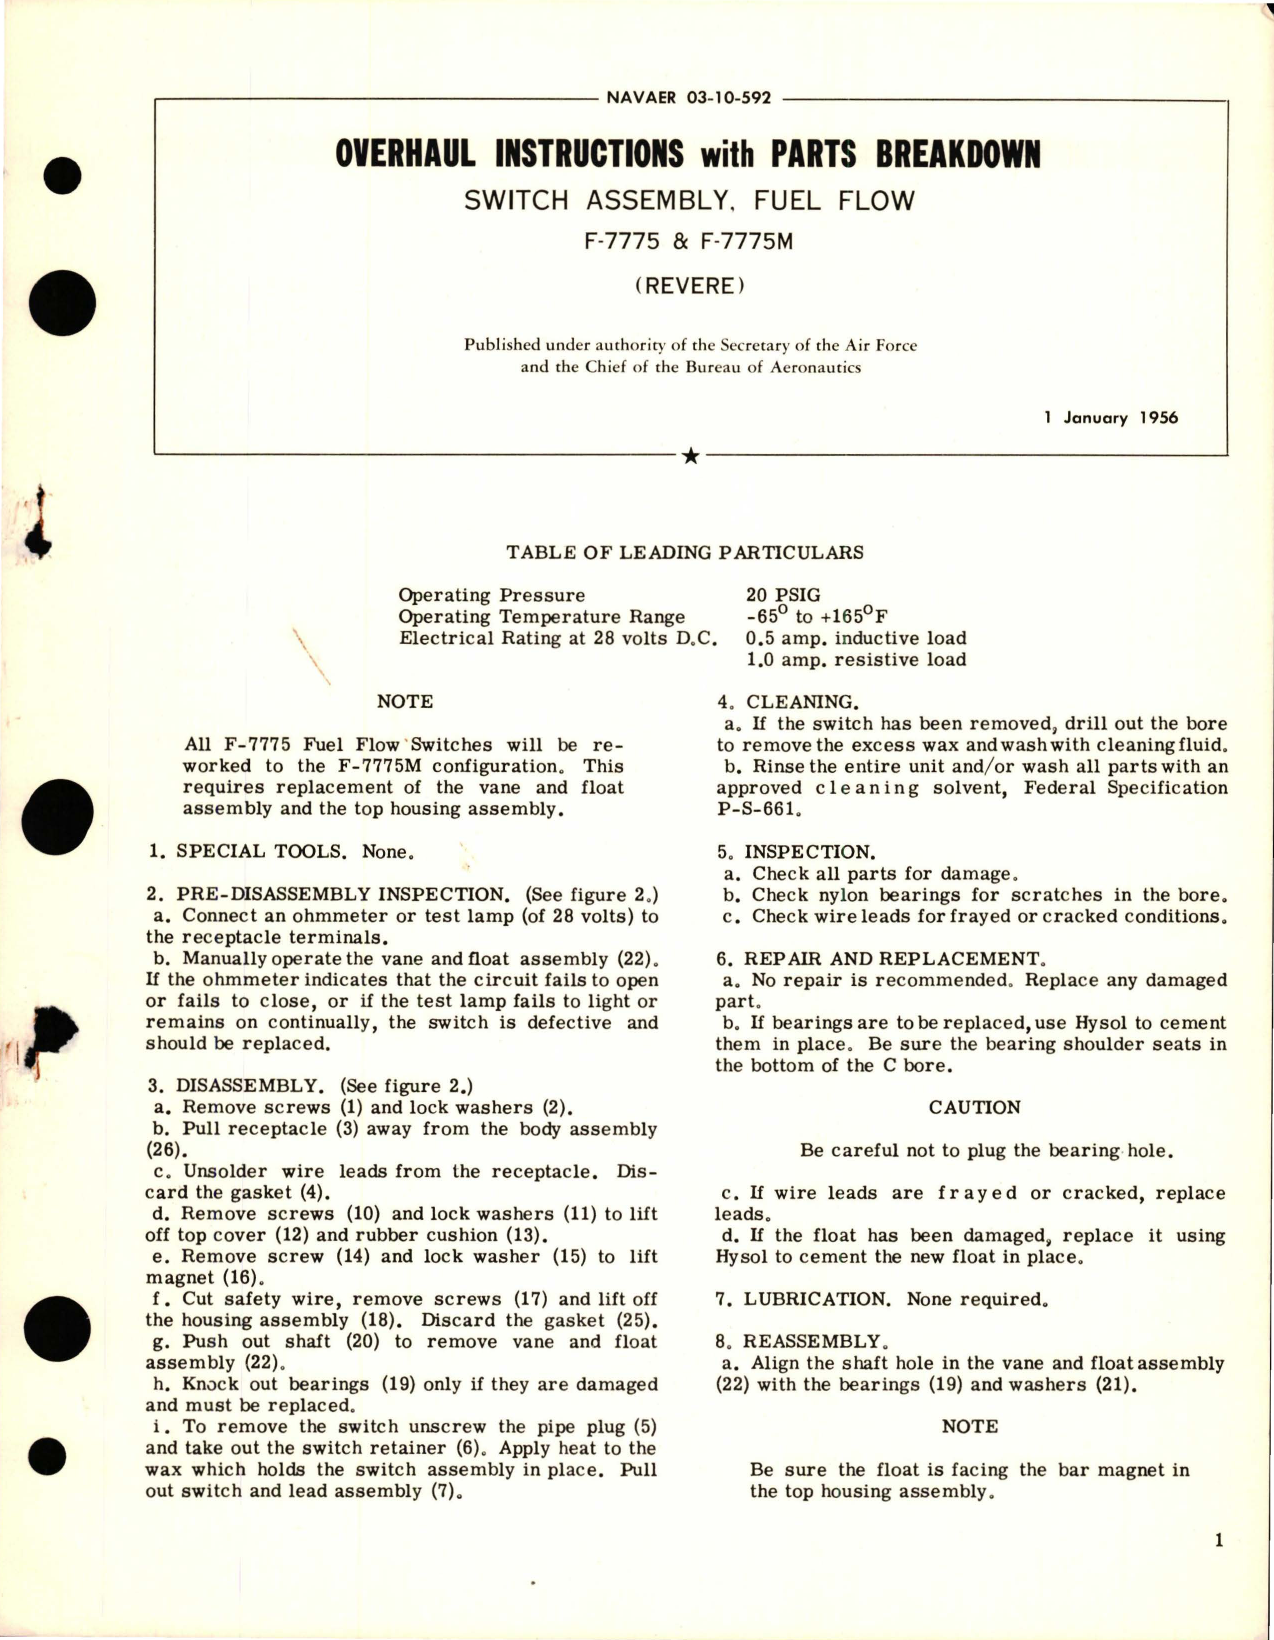 Sample page 1 from AirCorps Library document: Overhaul Instructions with Parts Breakdown for Fuel Flow Switch Assembly - F-7775 and F-7775M